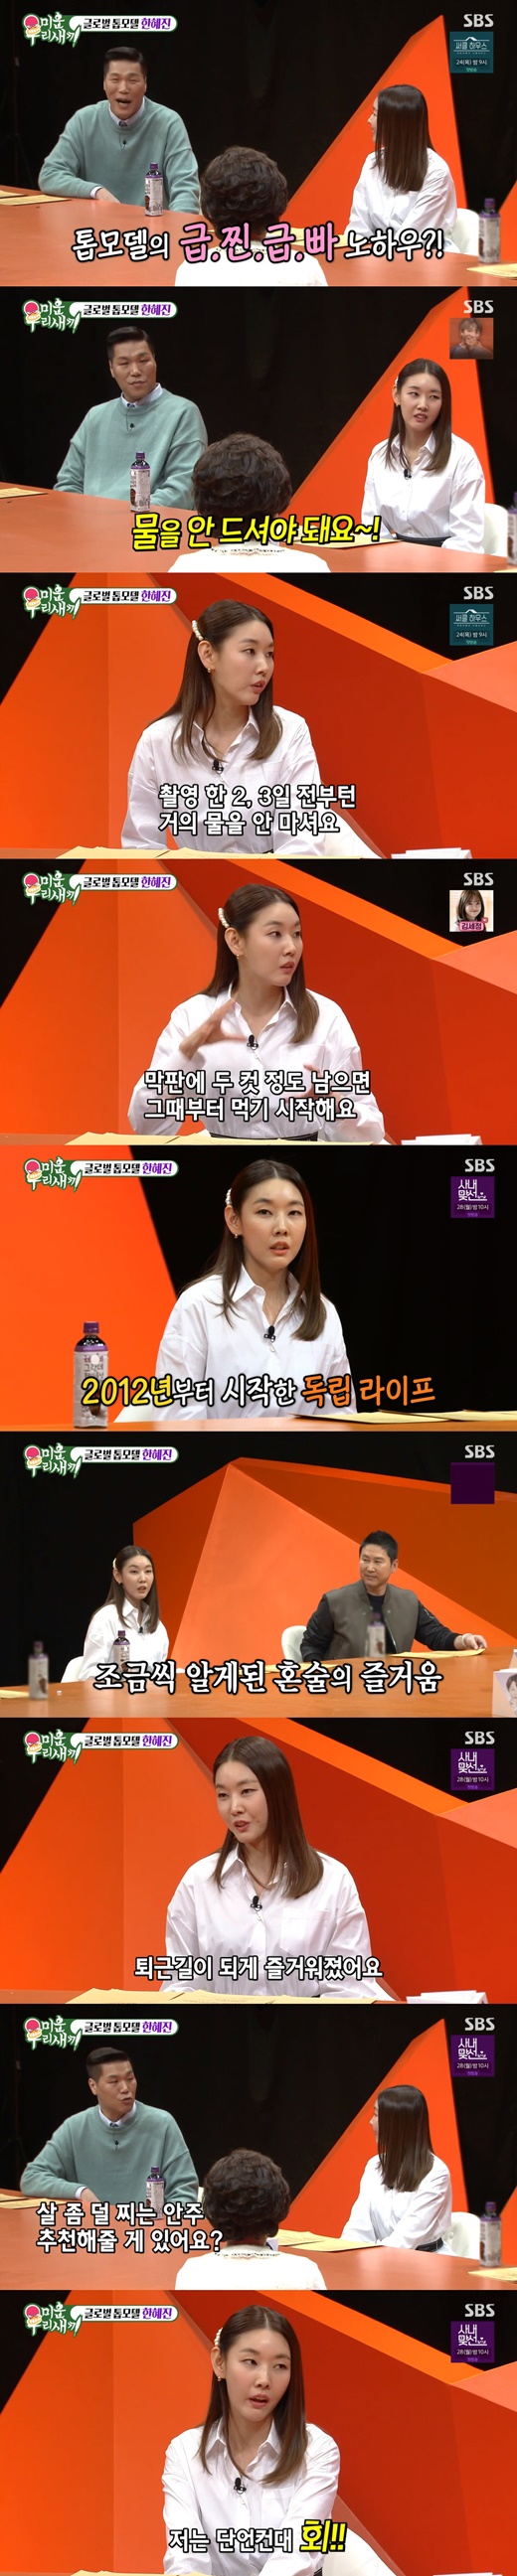 Model Han Hye-jin passed on the secret of rapid steaming fast (how to quickly lose steamed weight).On SBS My Little Old Boy broadcasted on the afternoon of the 20th, Han Hye-jin showed off his special MC.On this day, Seo Jang-hoon and Shin Dong-yup asked Han Hye-jin, an authority in the field of Diet, to tell him about his know-how.Han Hye-jin said, If you are in a hurry to remove unconditionally within two to three days, you should not drink unconditionally. People drink a lot of water if they eat Salinity.If you drink less water while eating salty things, you will definitely pour less. In fact, I make my body three weeks before shooting the picture and drink almost no water from two or three days ago. I have to dry like a mummy so I can see the bodys Definition and muscle flexion well. So I take 8 to 12 hours and then start drinking water at the last minute if I have two cuts.It is strange that the moisture on the face is rising in minutes. Han Hye-jin, who was especially in Lyric.I started living Alone in 2012, he said. I did not understand why I used to drink Alone, but I was getting more and more (changed) because Age was drinking.It is so good to sleep with Alone drink at home and I enjoyed my work. I swear it is a sashimi, he said. When it is cold, the sashimi is really delicious. If you eat a lot of sashimi, you will feel less guilty the next day.